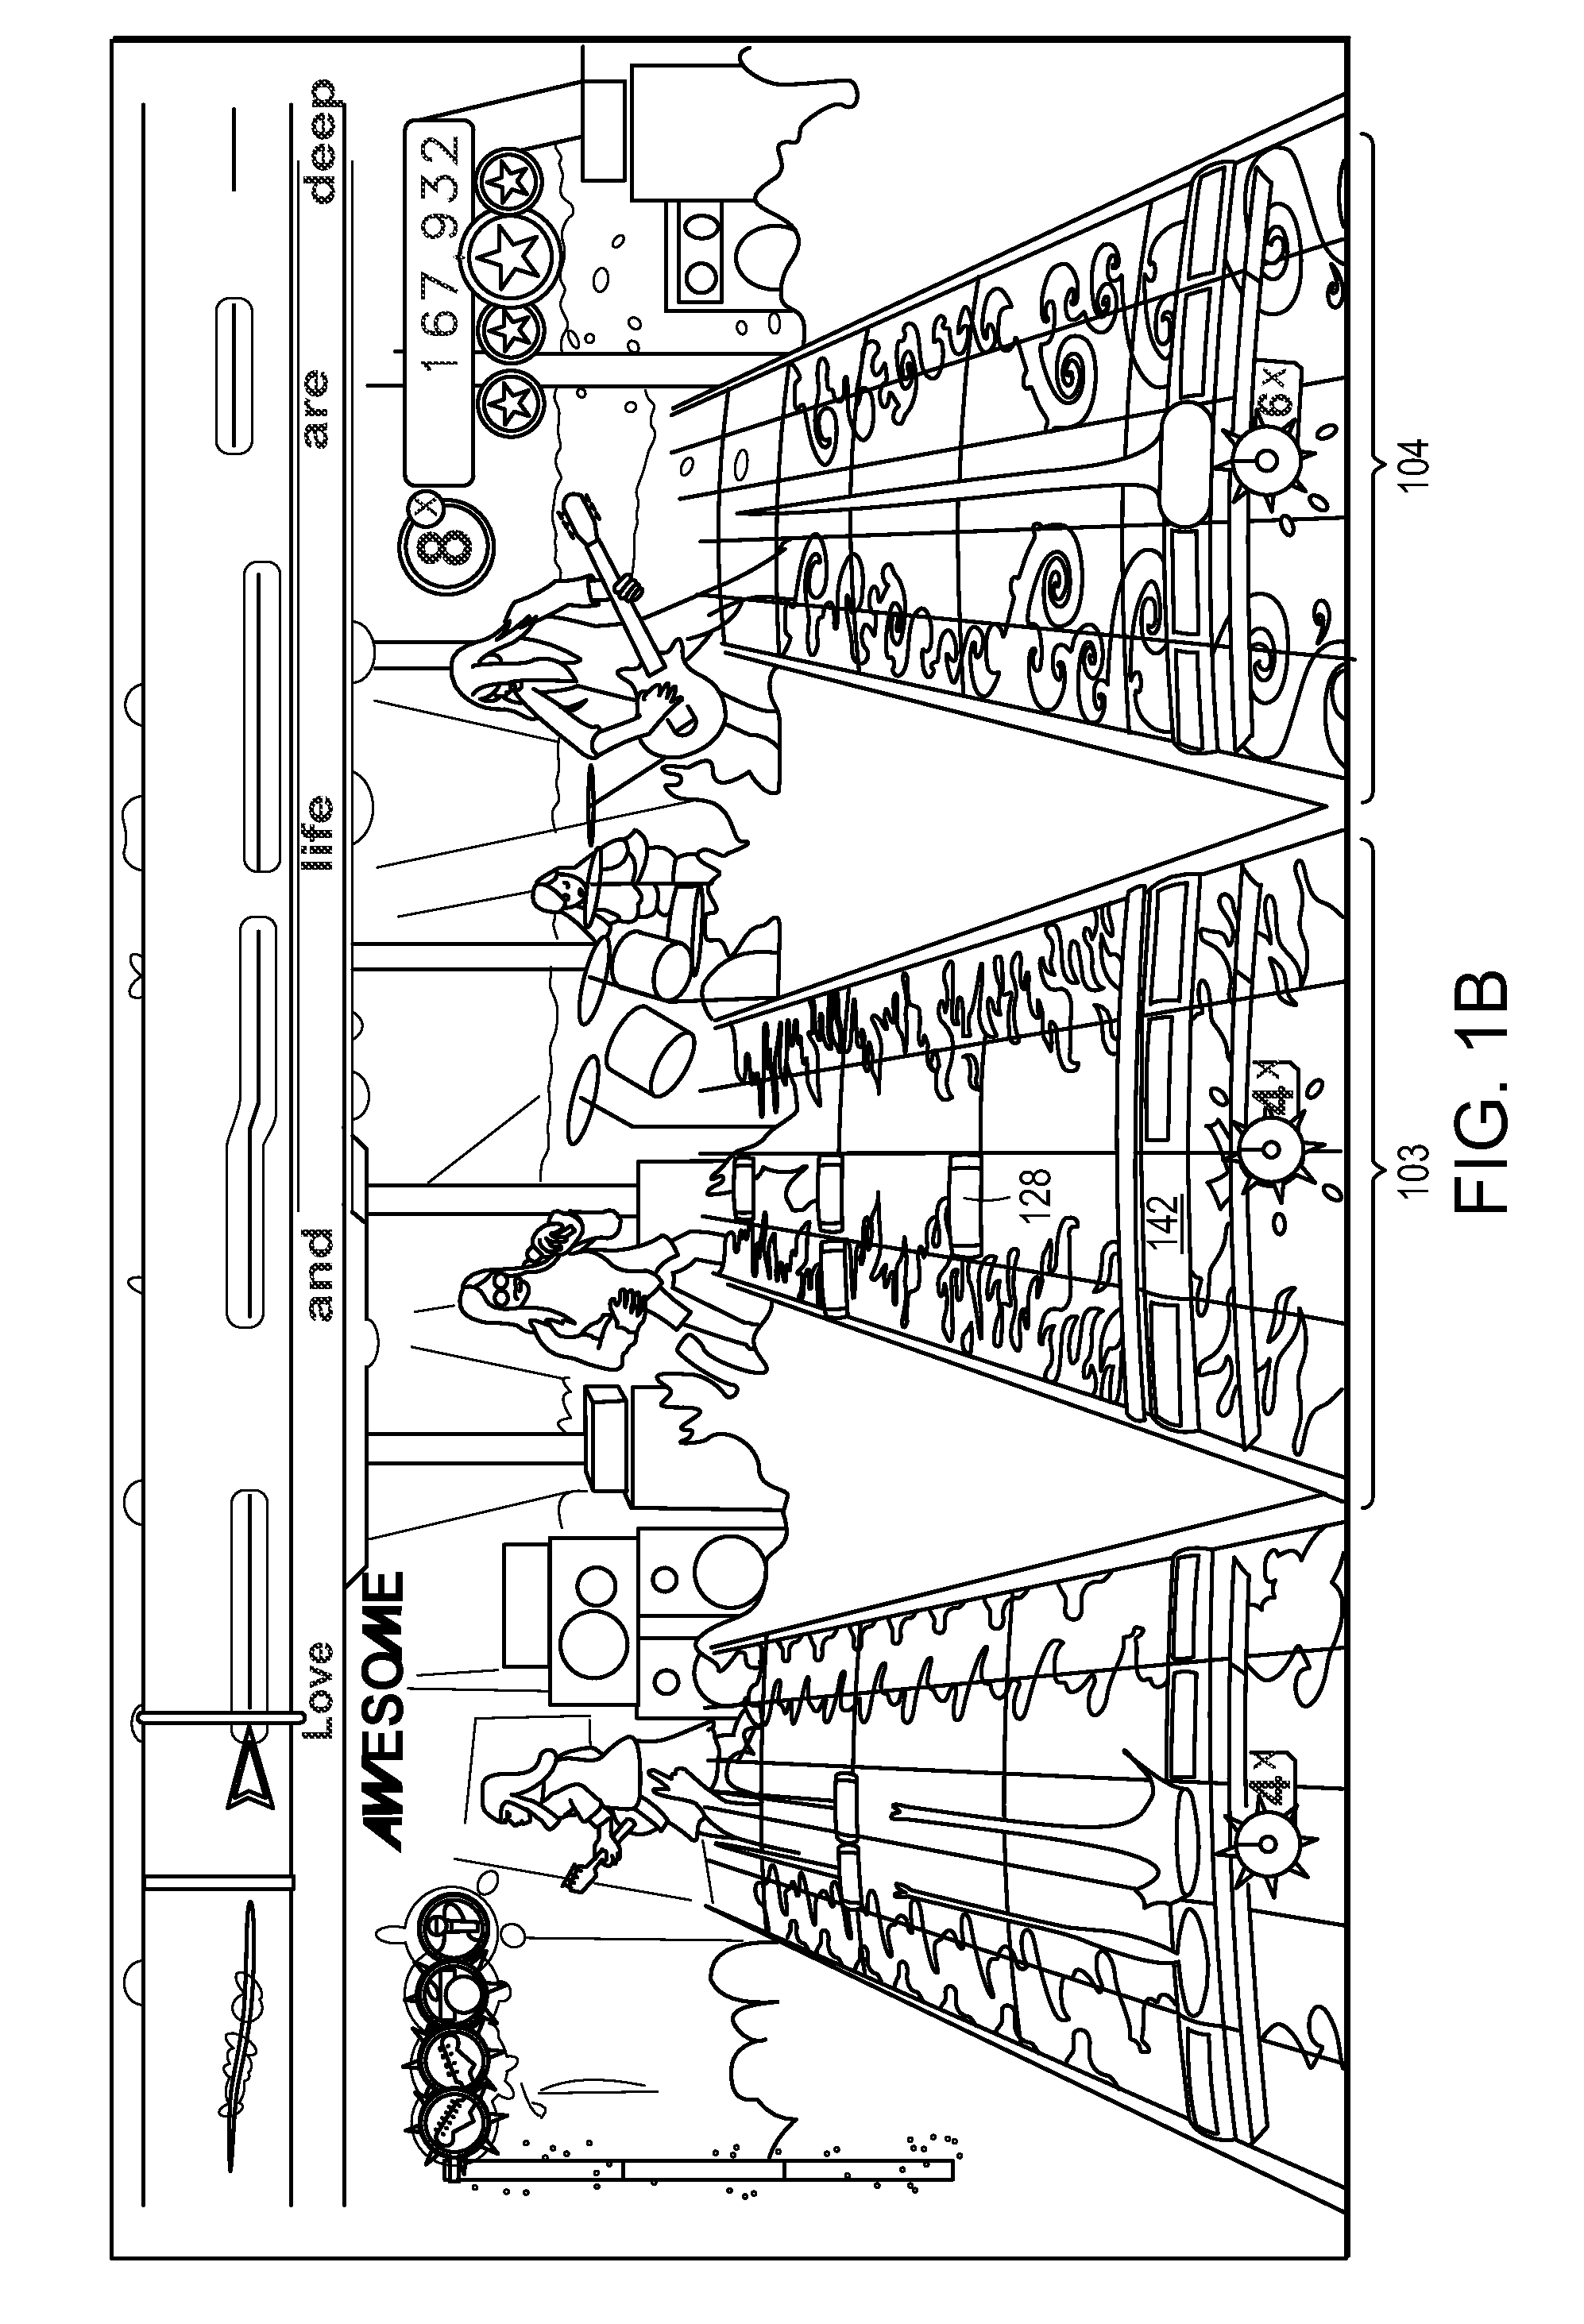 Systems and methods for simulating a rock band experience